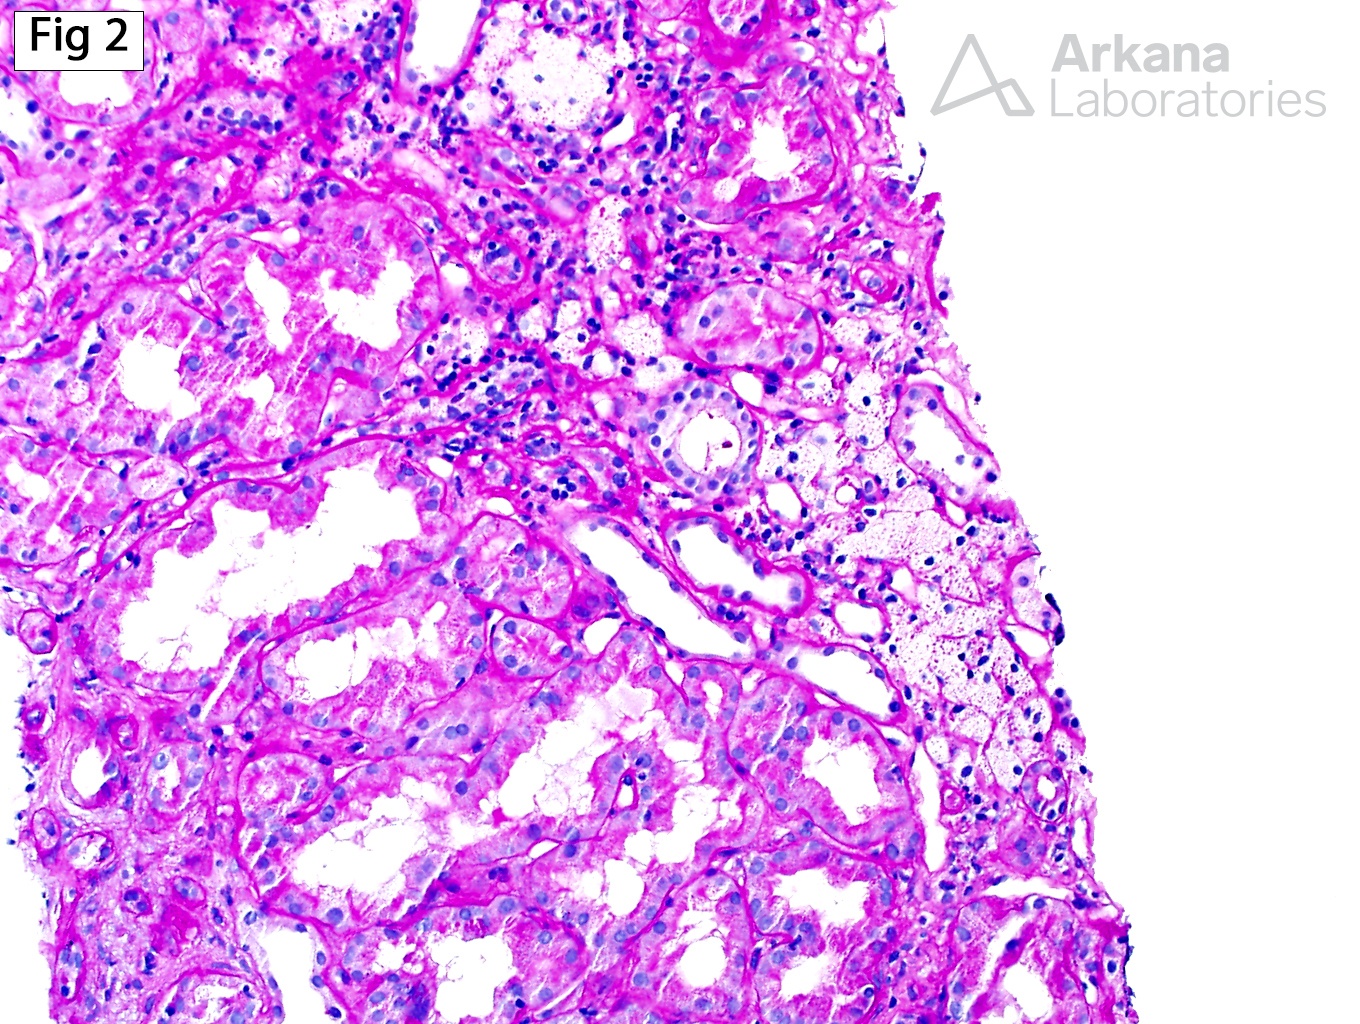 moderate interstitial fibrosis and tubular atrophy, frequent interstitial foam cells, Alport Syndrome